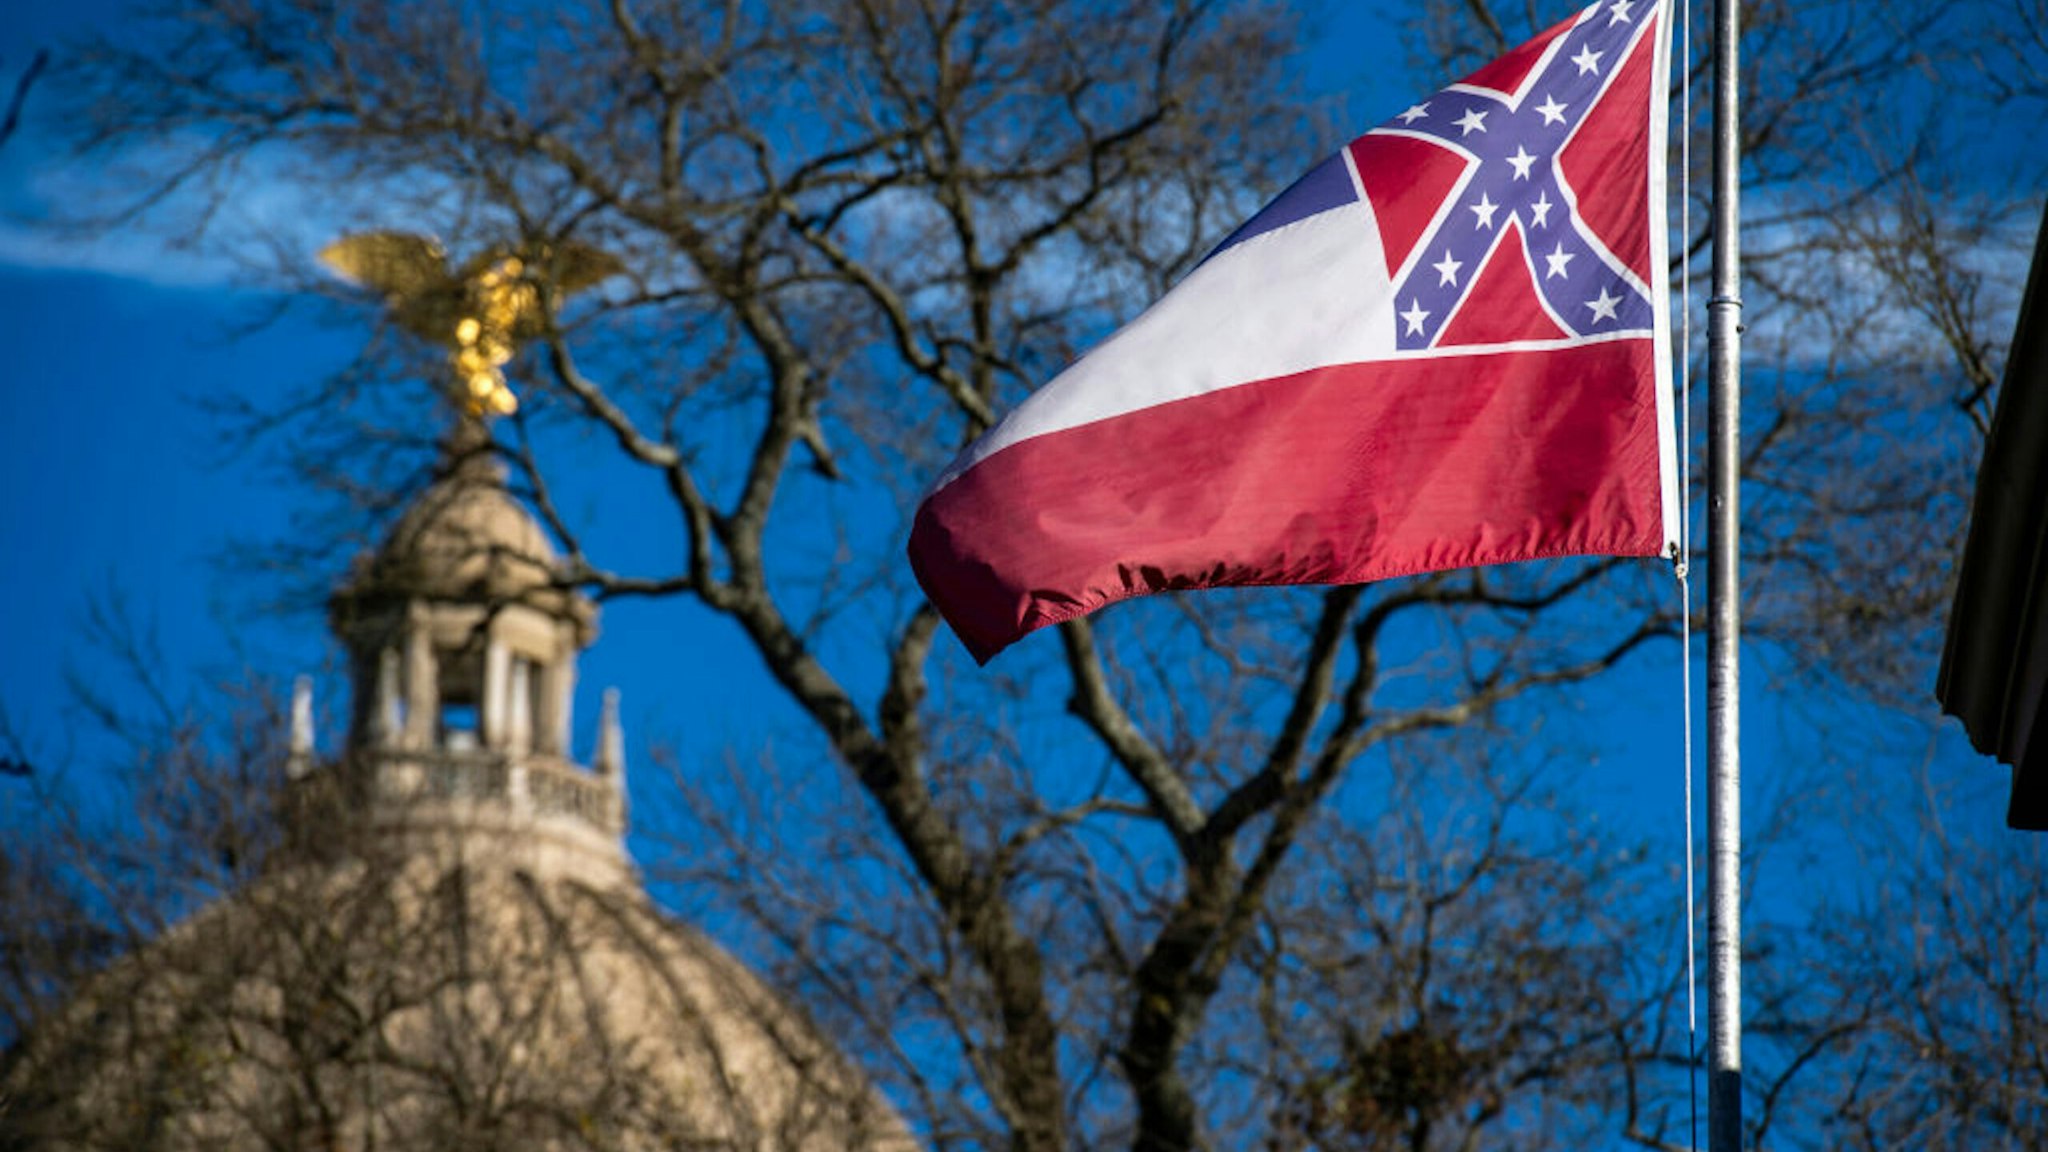 Jackson, MS - JANUARY 10: The Mississippi State Capitol dome is visible in the distance as the flag of the state of Mississippi flies nearby in Jackson, MS on January 10, 2019.